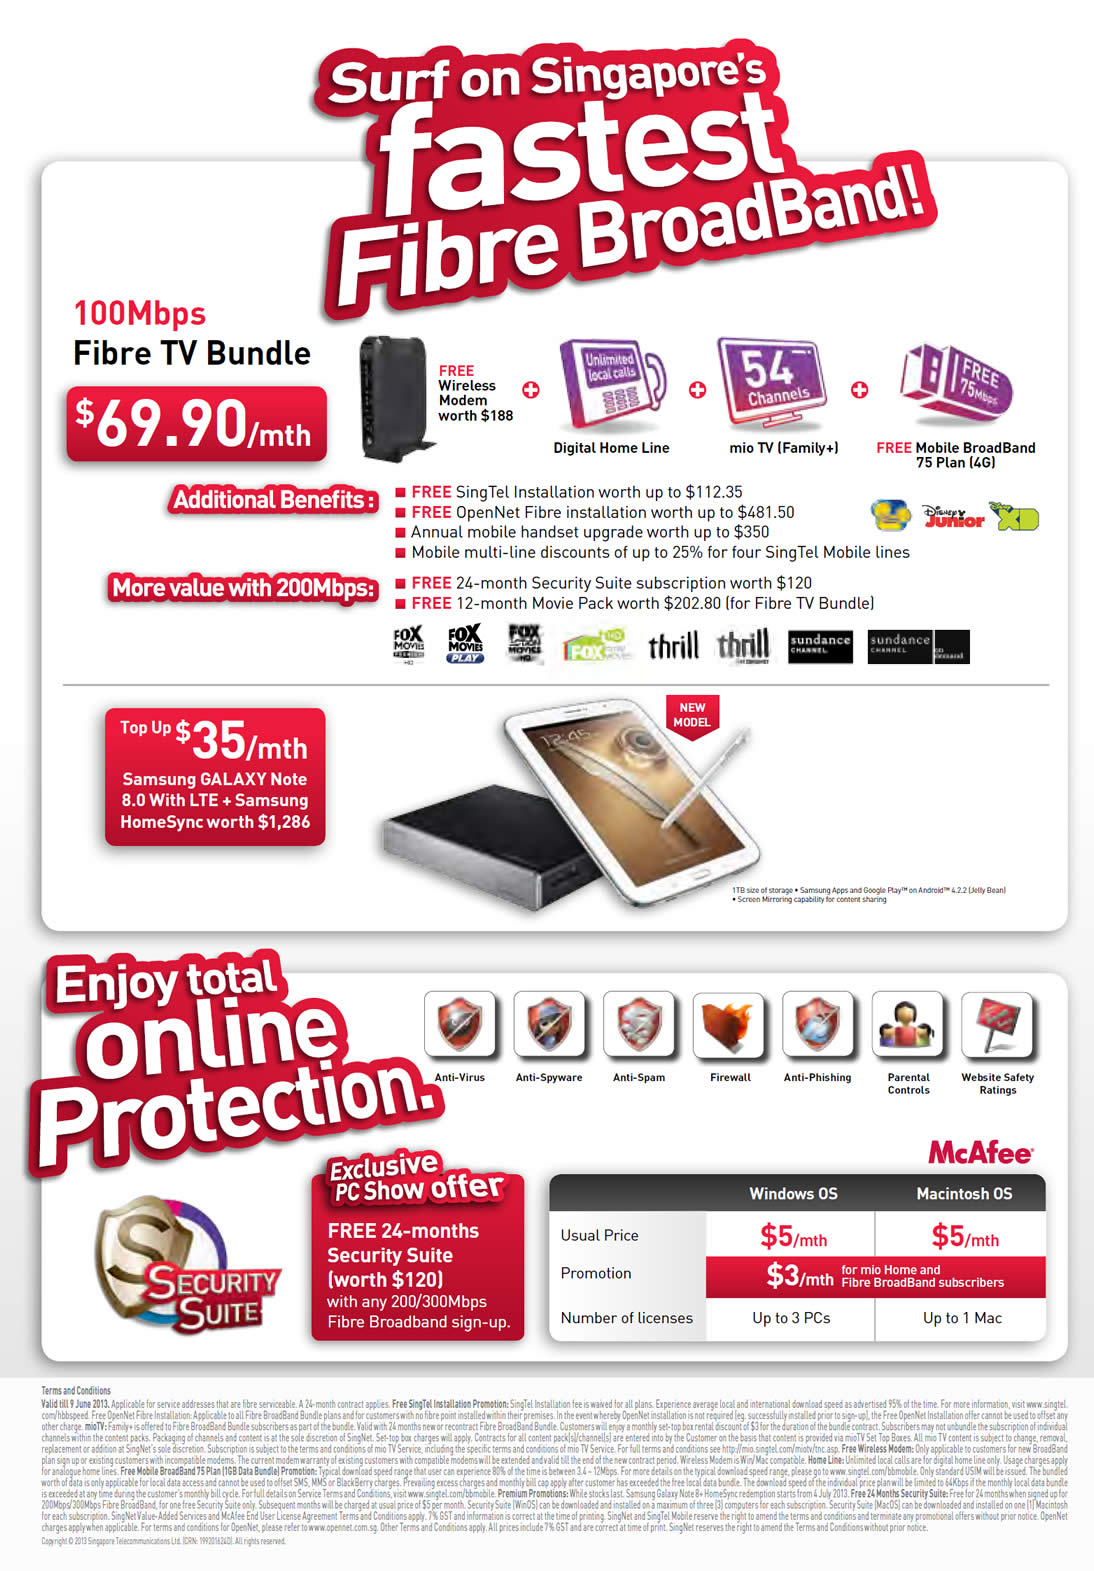 PC SHOW 2013 price list image brochure of Singtel Broadband Fibre 100Mbps 69.90, Fibre TV, Fixed Line, Mio TV, Mobile Broadband Samsung Galaxy Note 8.0 LTE, Home Sync, Security Suite